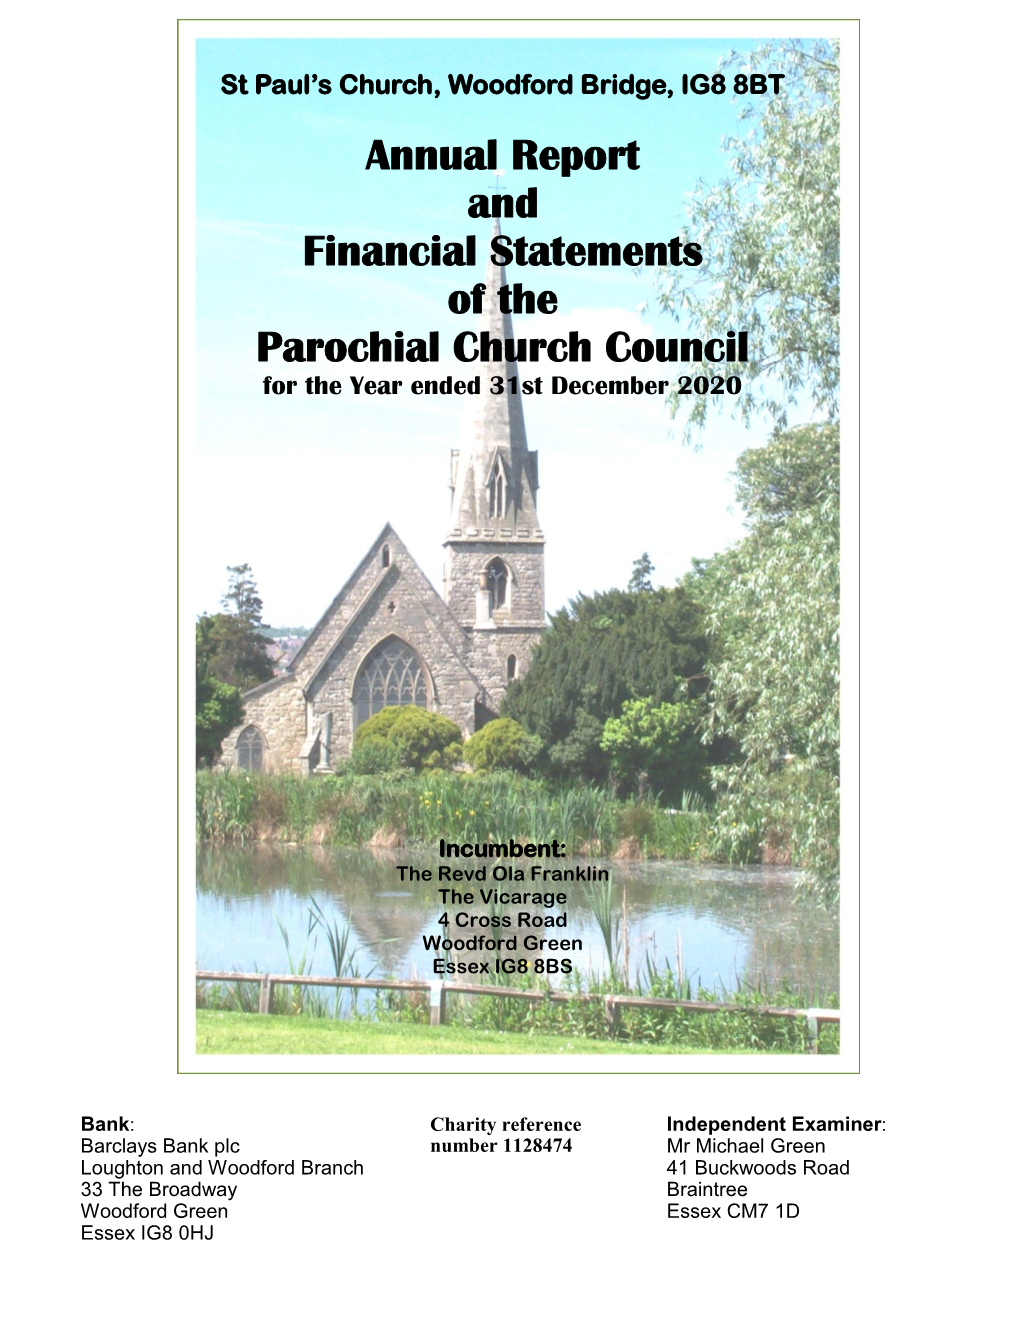 Annual Report and Financial Statements of the Parochial Church